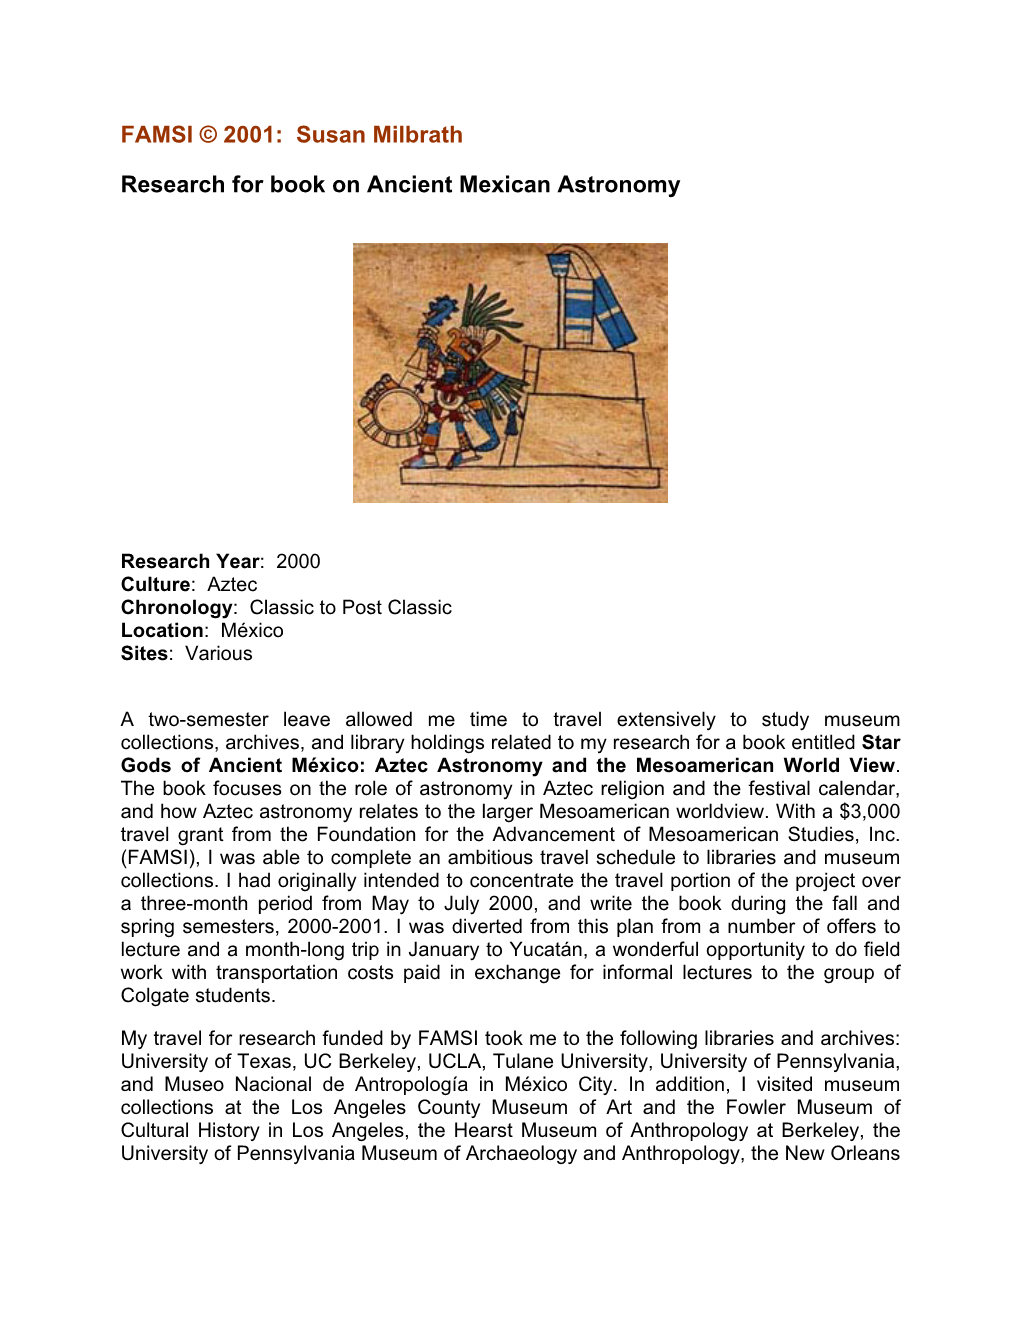 Research for Book on Ancient Mexican Astronomy